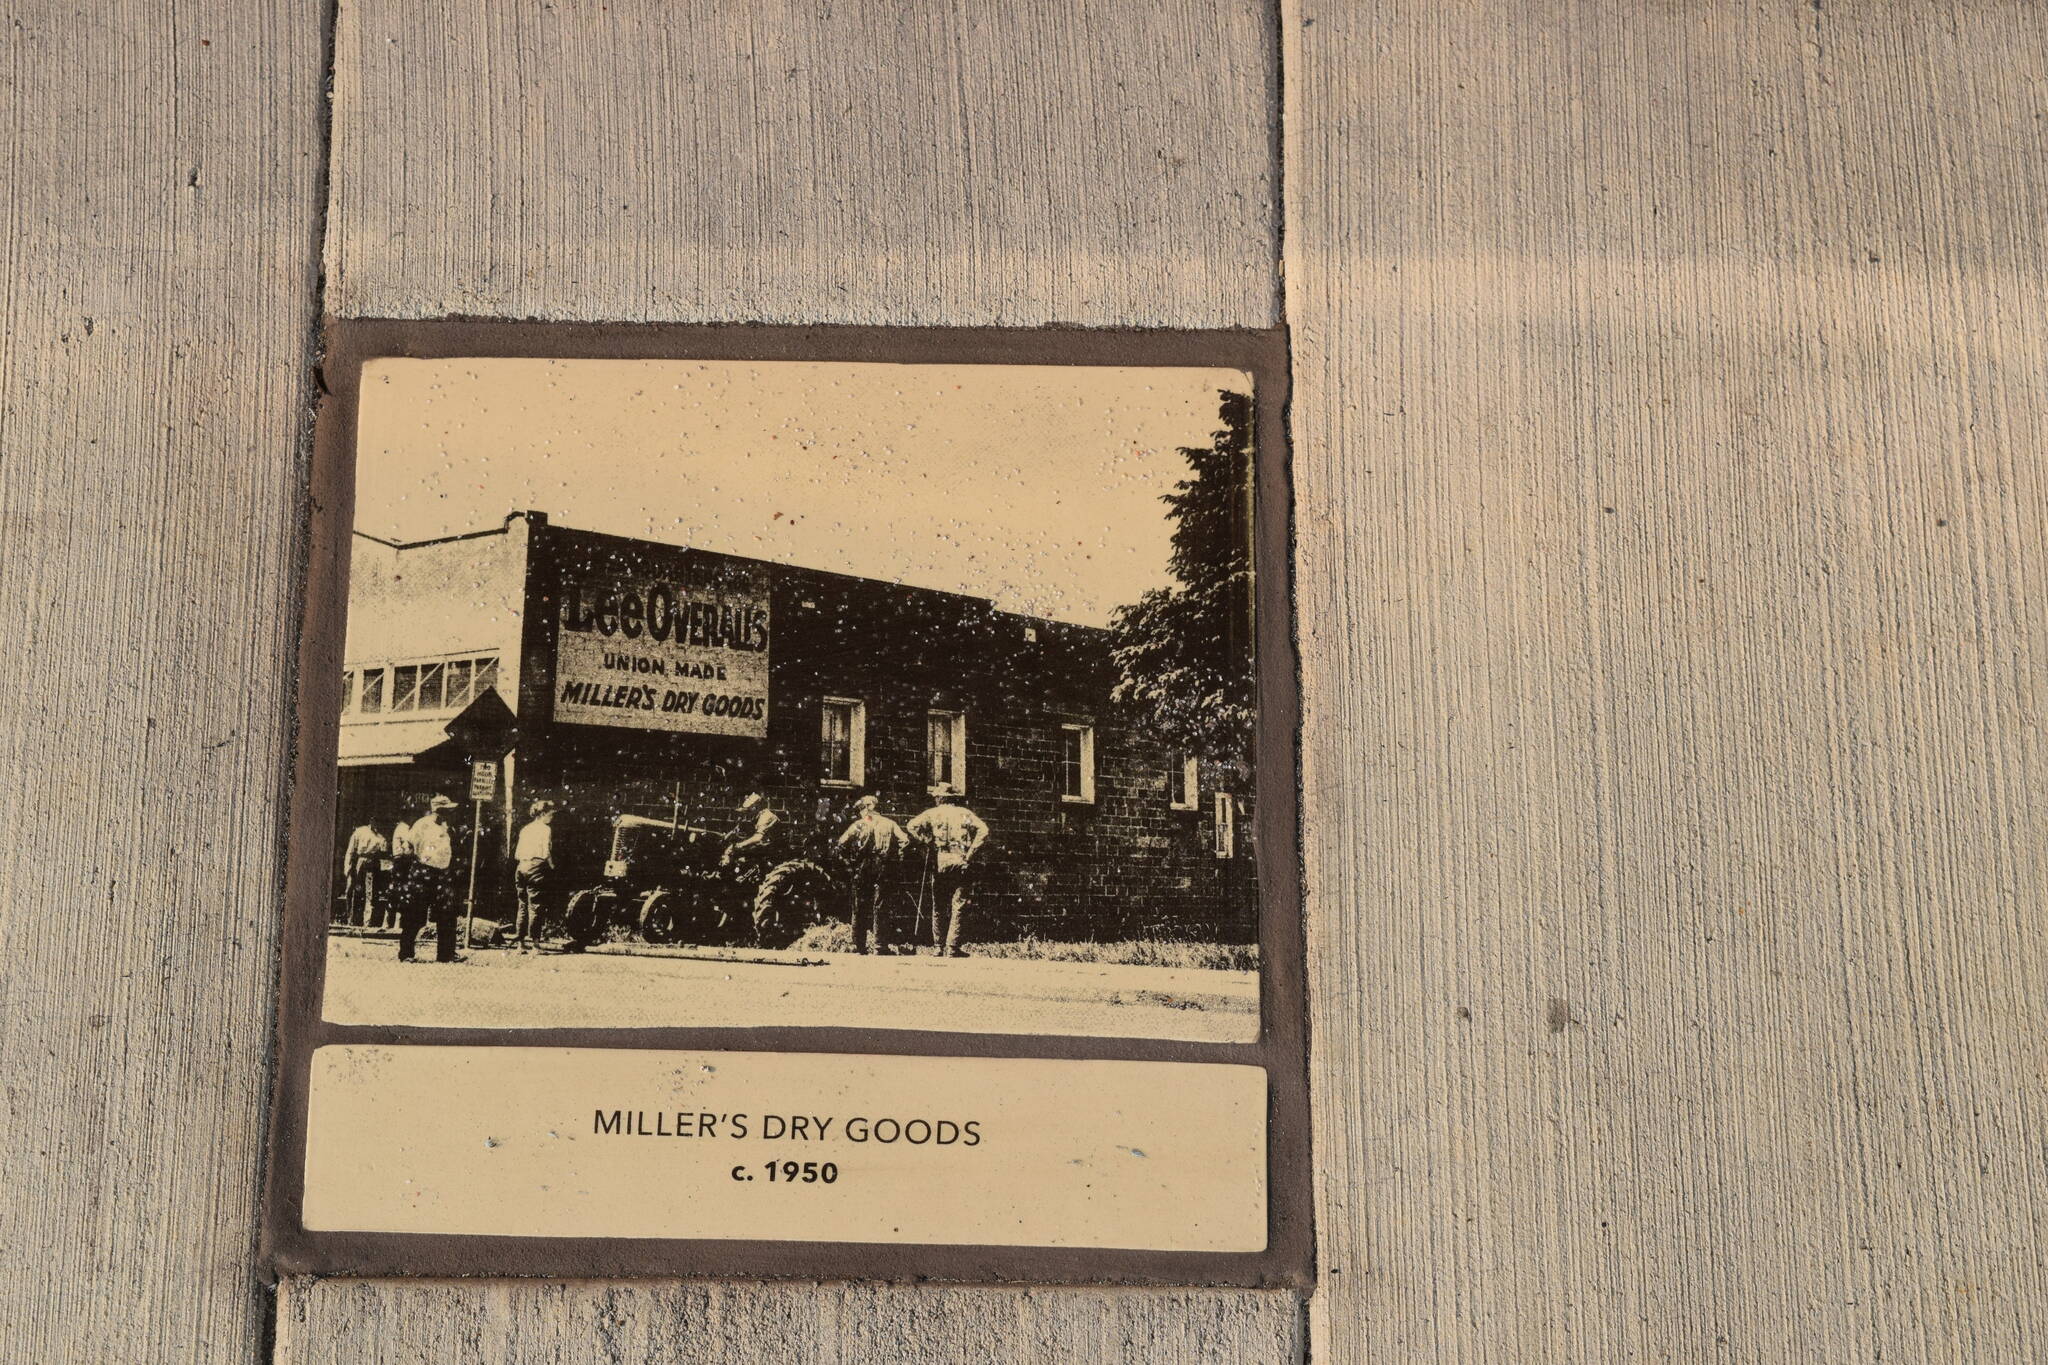 Conor Wilson / Valley Record 
Miller’s dry goods tile on the Tolt Avenue History Tiles.